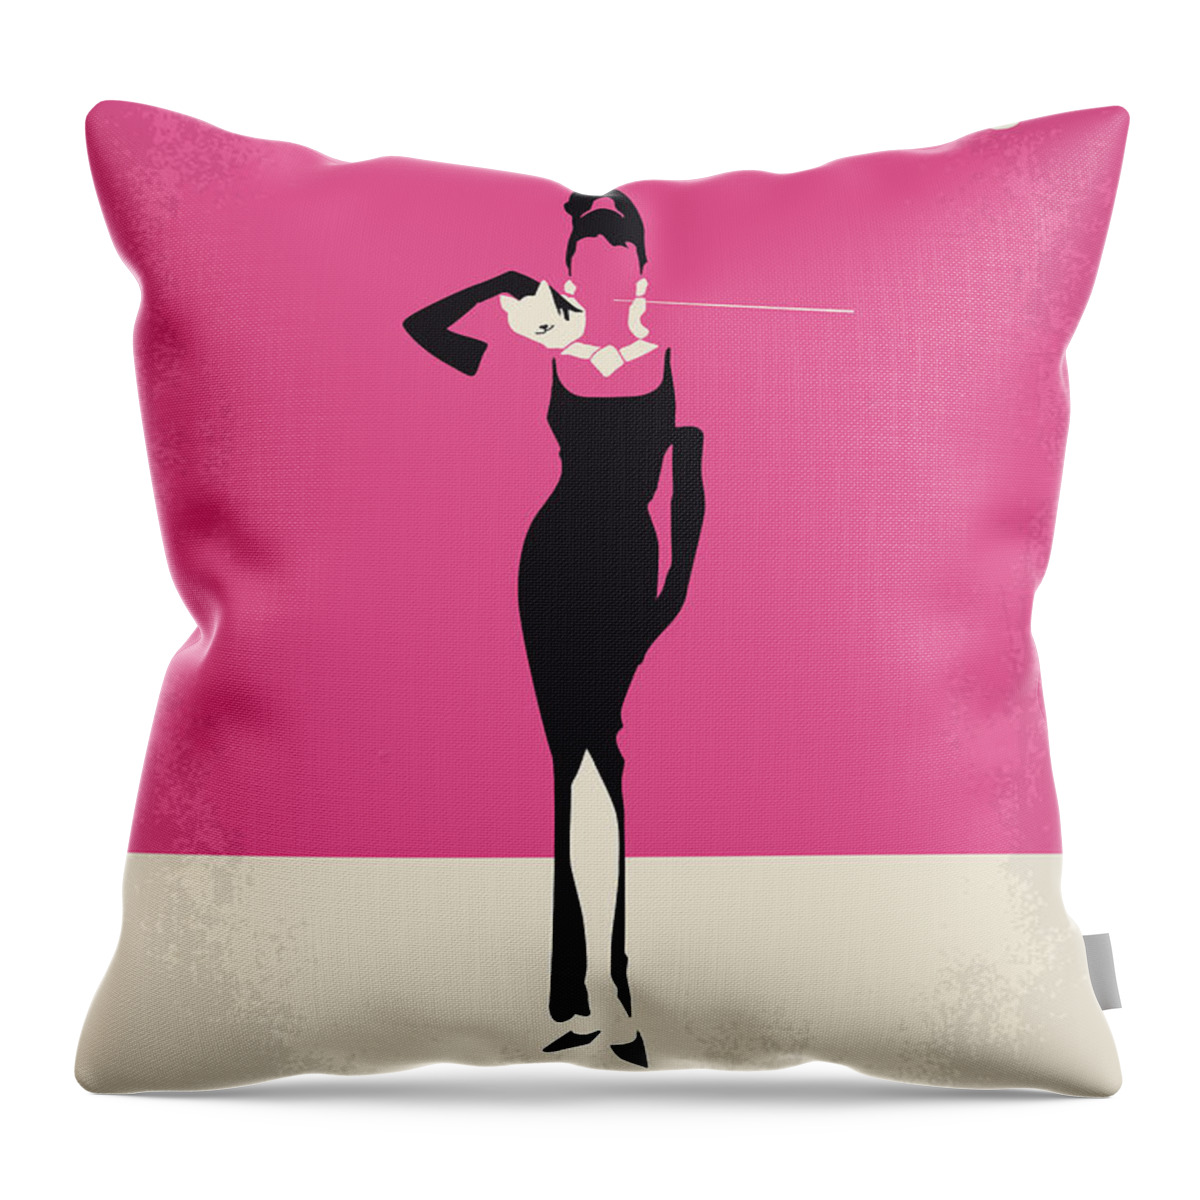 Breakfast At Tiffanys Throw Pillow featuring the digital art No204 My Breakfast at Tiffanys minimal movie poster by Chungkong Art